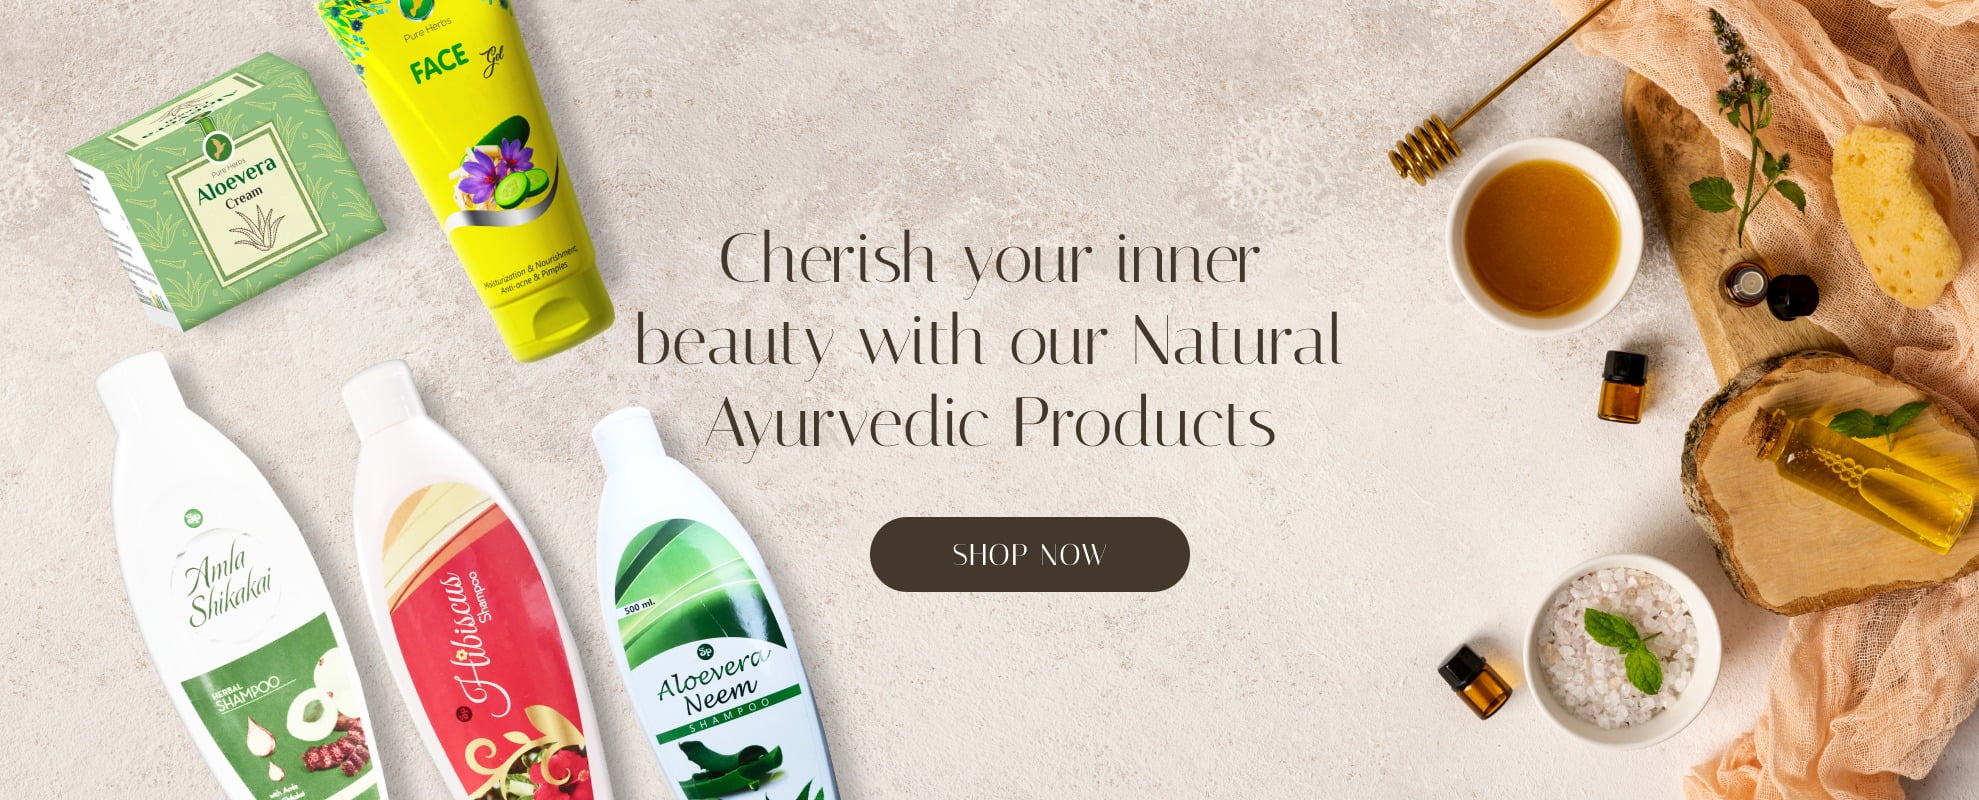 beauty product banner (1)